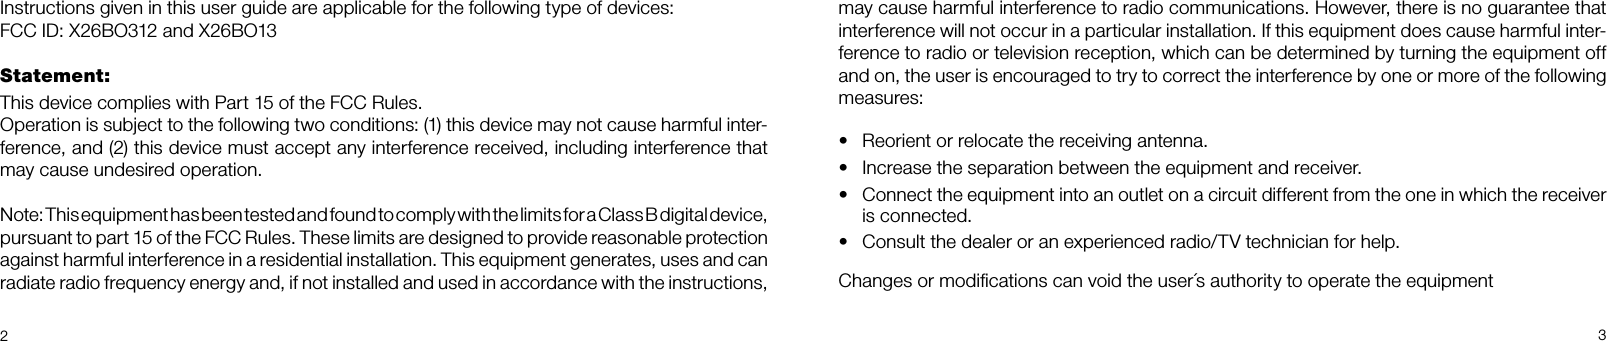 23may cause harmful interference to radio communications. However, there is no guarantee that interference will not occur in a particular installation. If this equipment does cause harmful inter-ference to radio or television reception, which can be determined by turning the equipment off and on, the user is encouraged to try to correct the interference by one or more of the following measures:•  Reorient or relocate the receiving antenna.•  Increase the separation between the equipment and receiver.•  Connect the equipment into an outlet on a circuit different from the one in which the receiver is connected.•  Consult the dealer or an experienced radio/TV technician for help.Changes or modiﬁcations can void the user´s authority to operate the equipmentInstructions given in this user guide are applicable for the following type of devices: FCC ID: X26BO312 and X26BO13Statement:This device complies with Part 15 of the FCC Rules.Operation is subject to the following two conditions: (1) this device may not cause harmful inter-ference, and (2) this device must accept any interference received, including interference that may cause undesired operation.Note: This equipment has been tested and found to comply with the limits for a Class B digital device, pursuant to part 15 of the FCC Rules. These limits are designed to provide reasonable protection against harmful interference in a residential installation. This equipment generates, uses and can  radiate radio frequency energy and, if not installed and used in accordance with the instructions,  